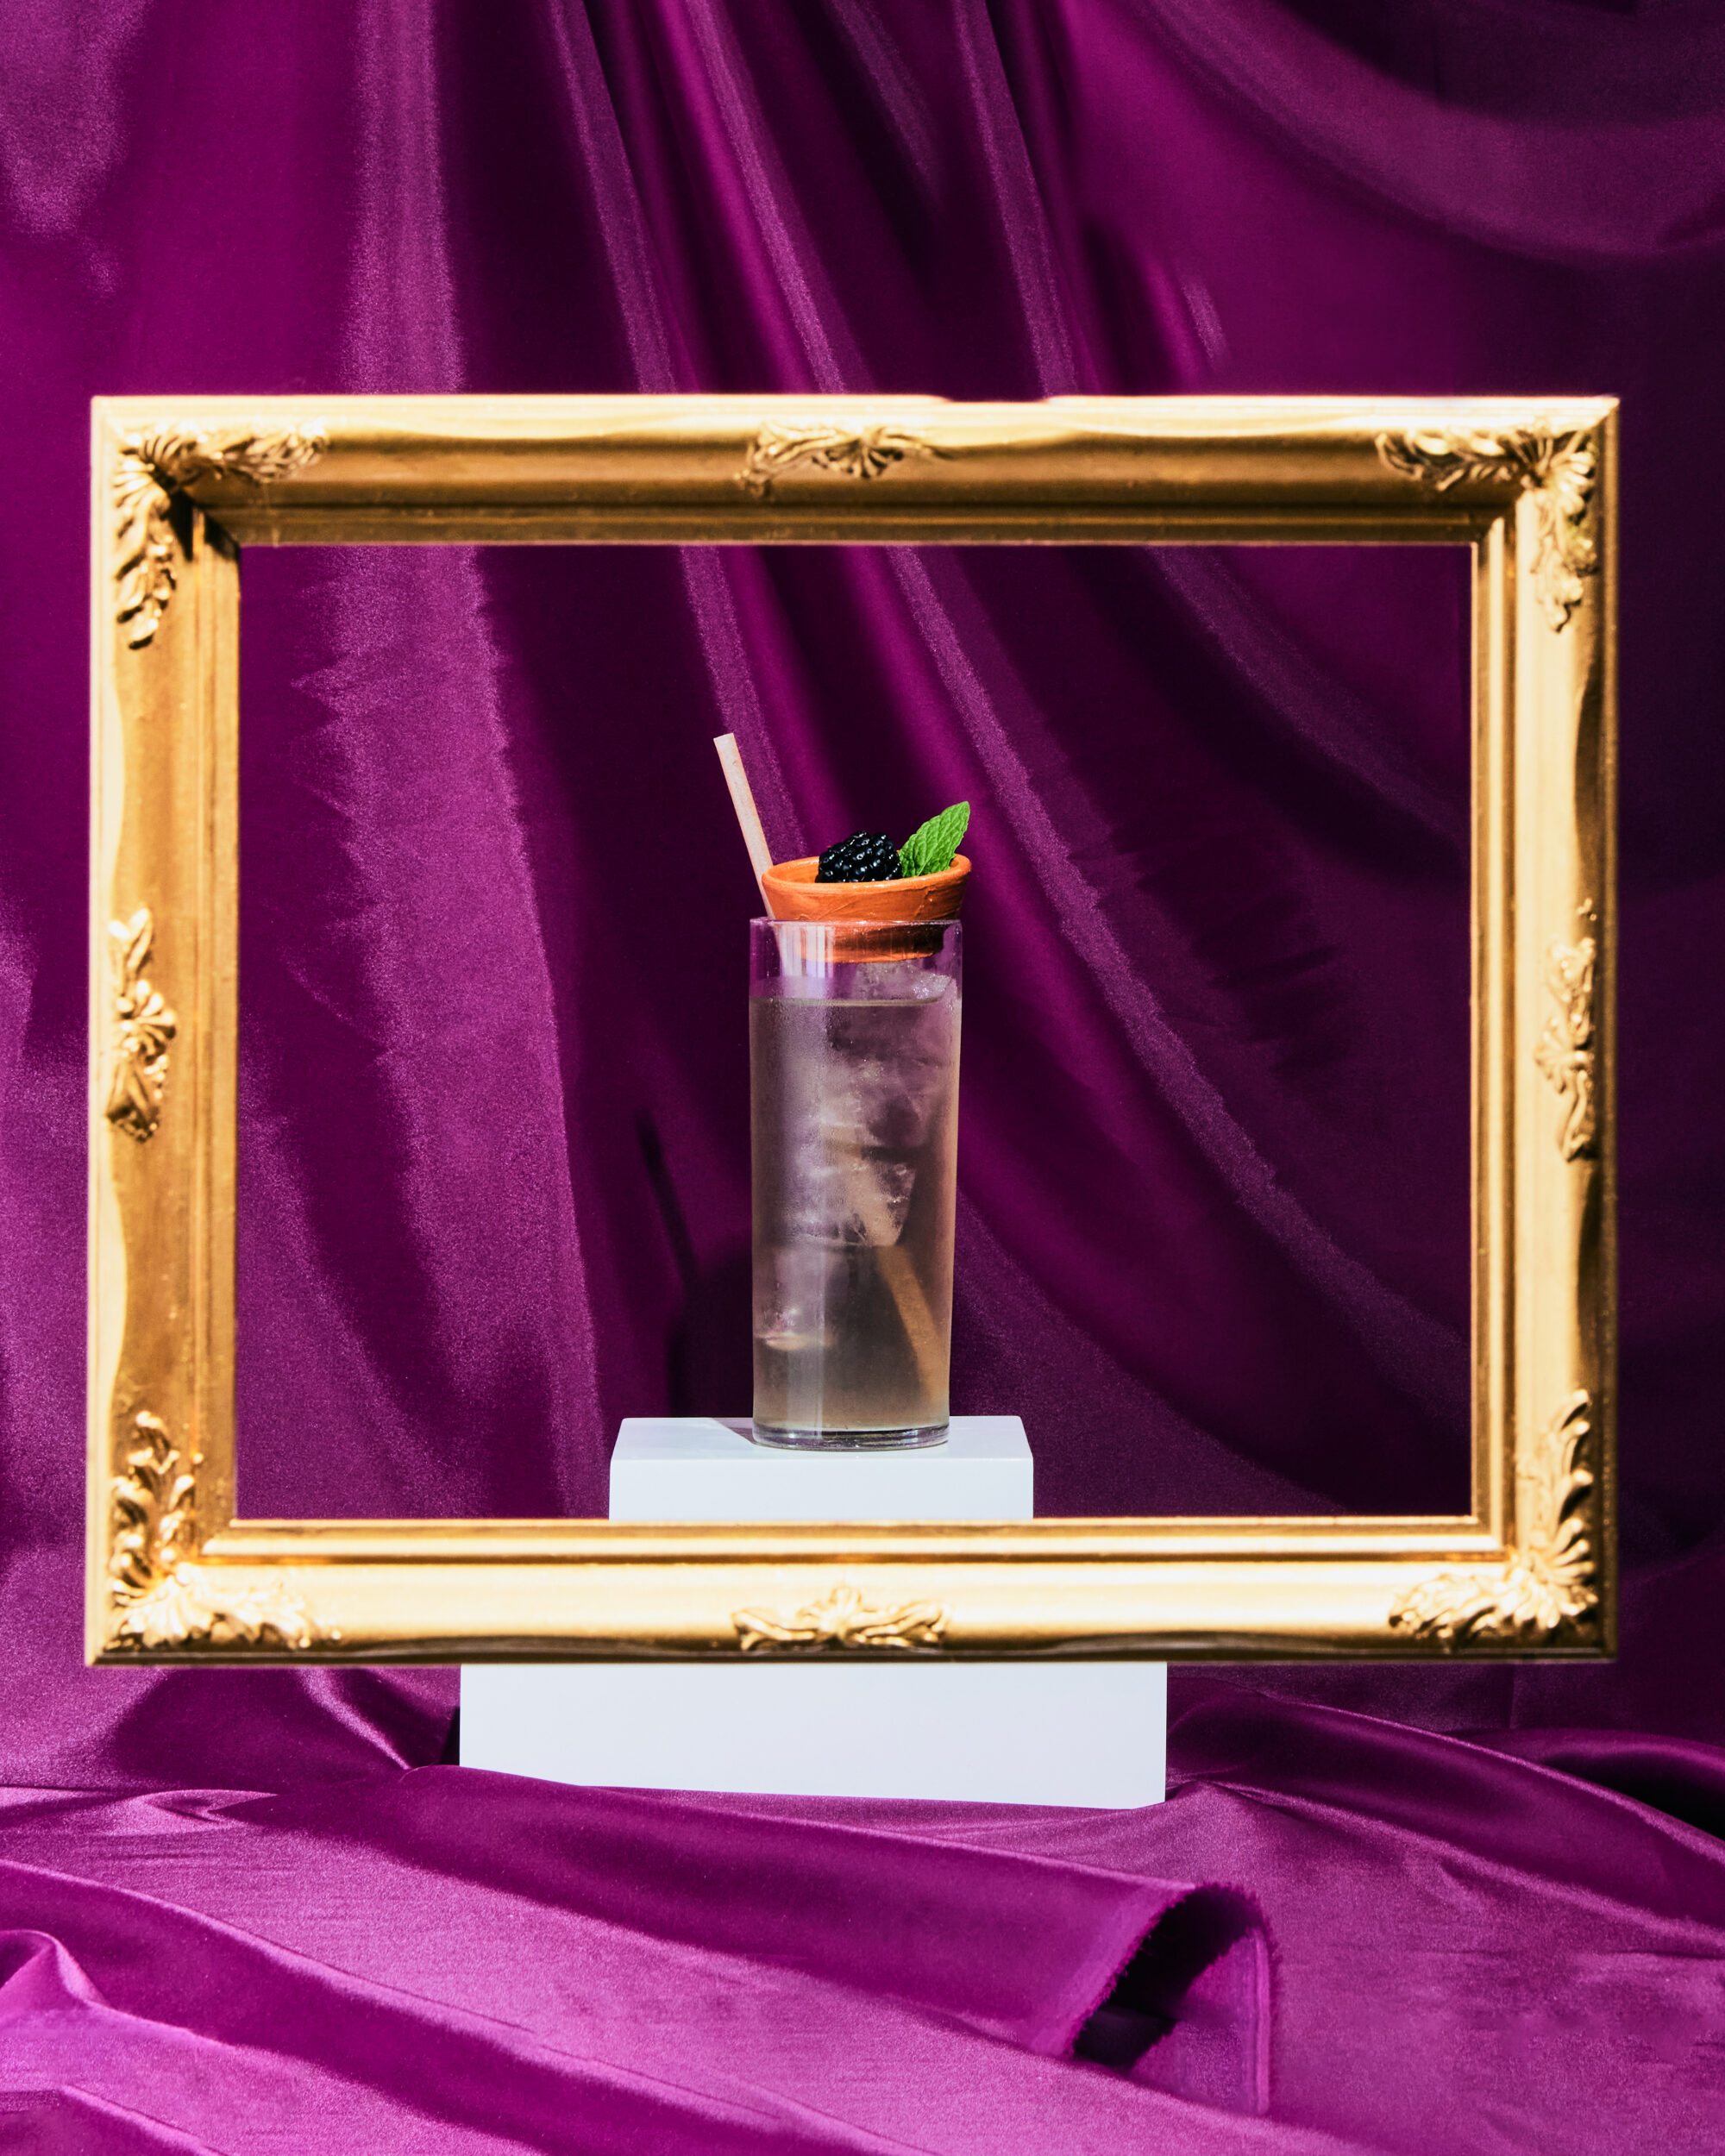 A cocktail is artfully presented in a picture frame as it it were in a museum.